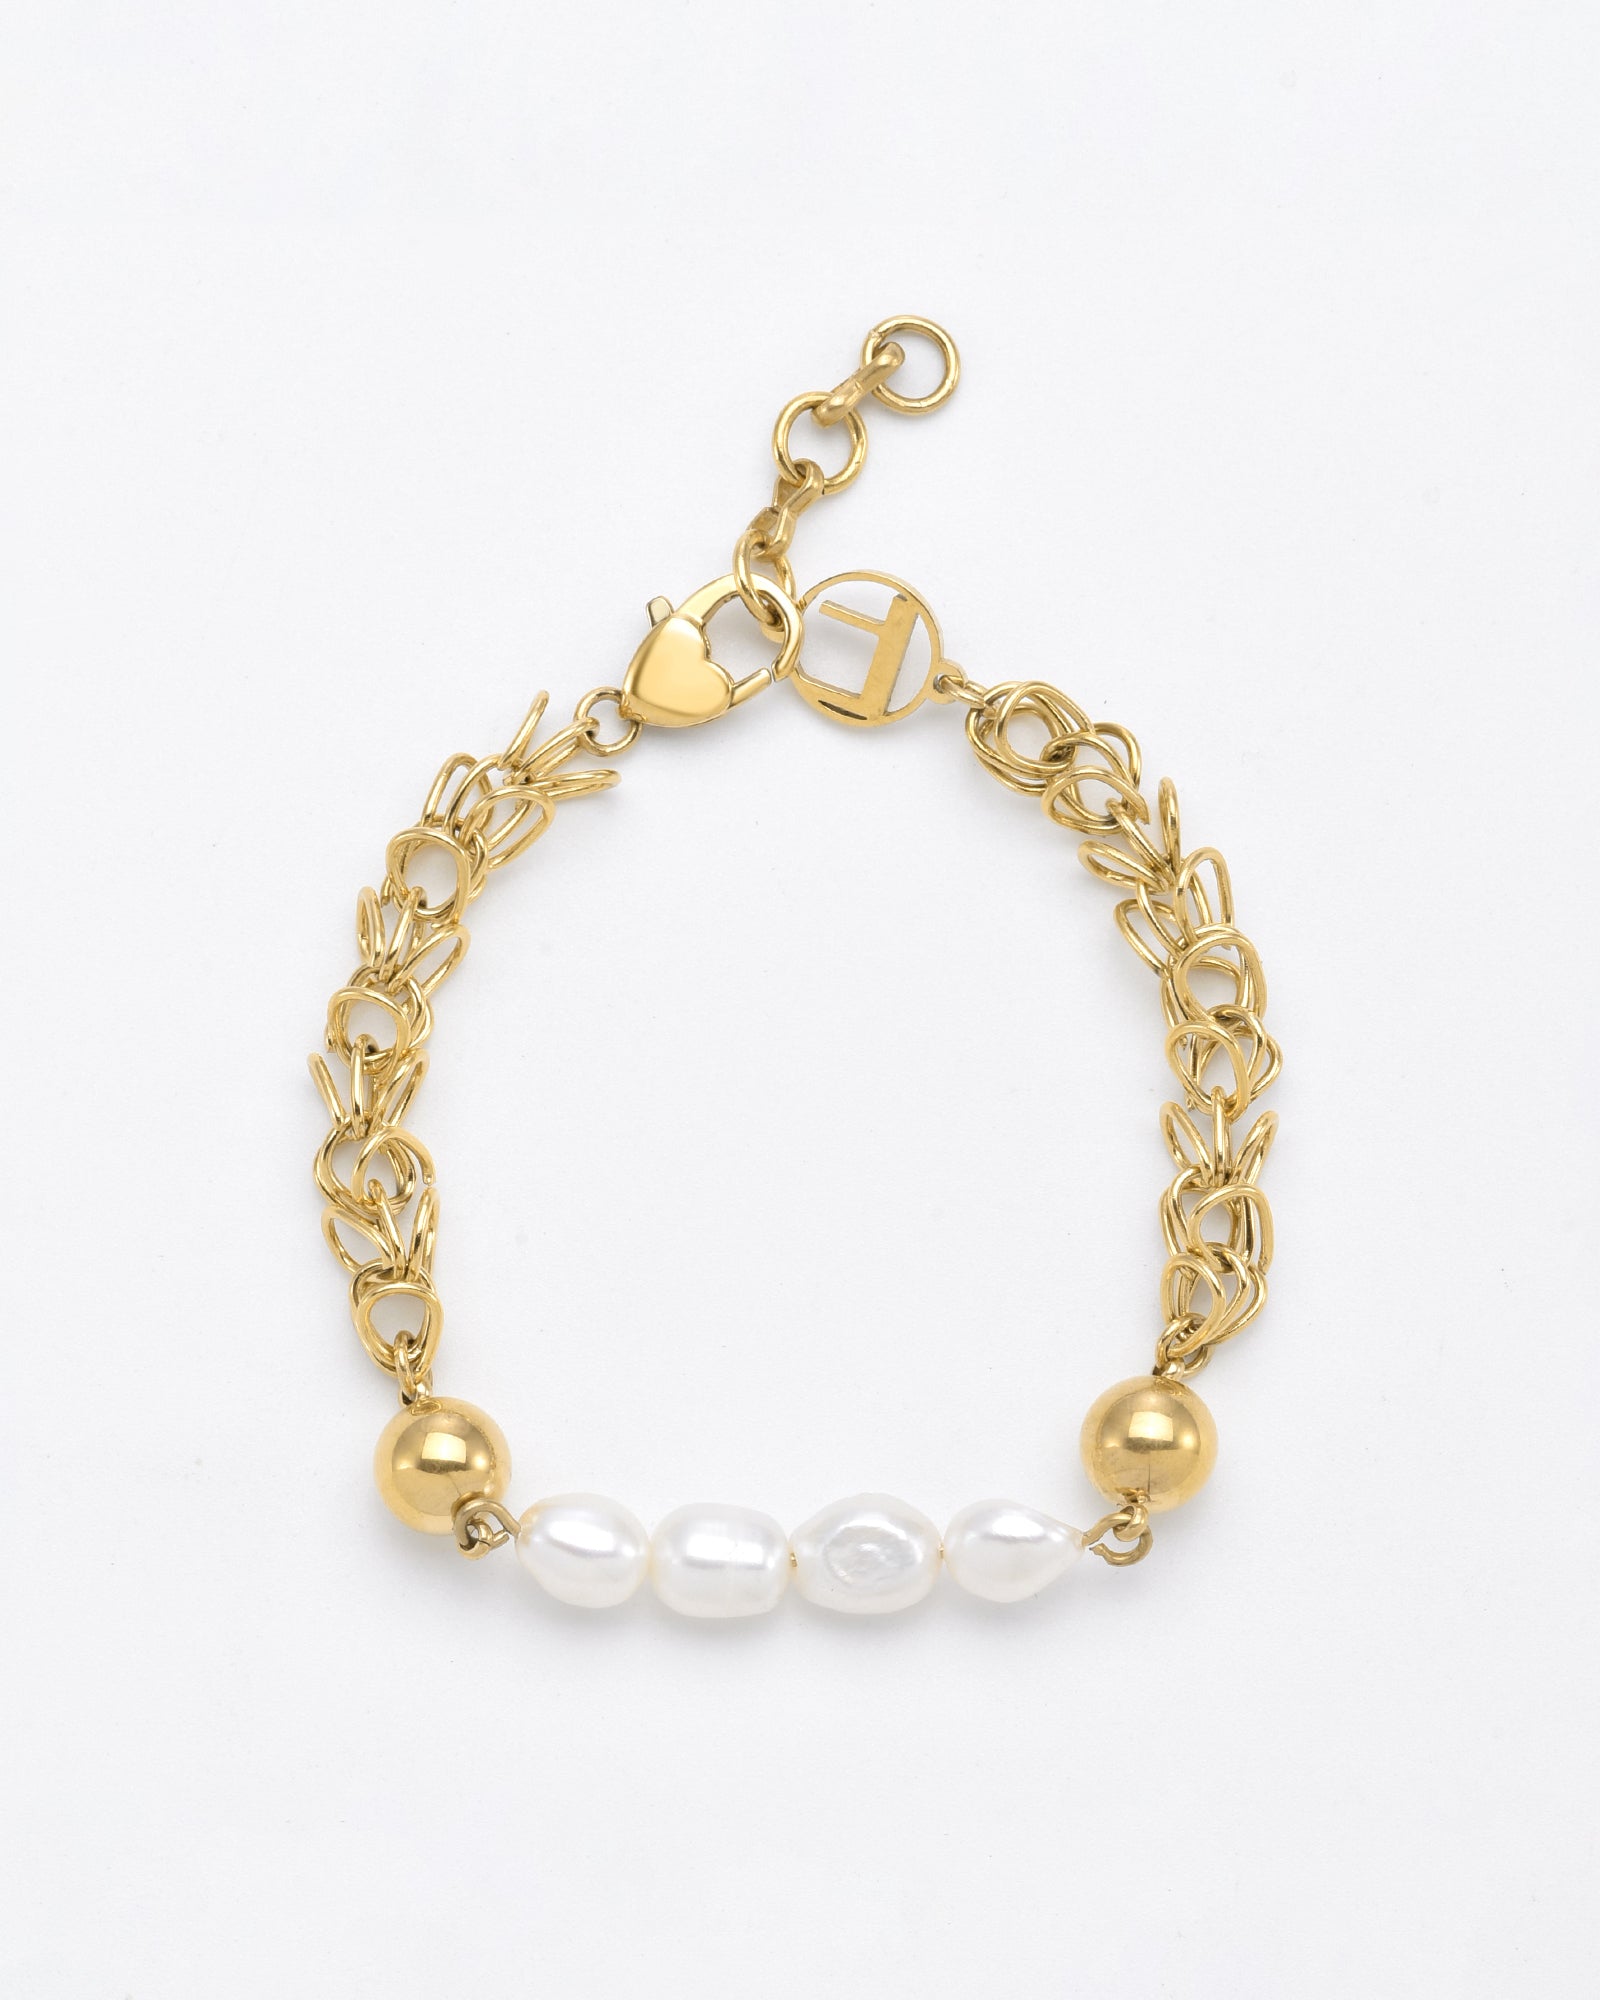 The For Art's Sake® Athena Bracelet Gold showcases refined elegance with its gold chain featuring a mix of intricate and bold link designs. Adorned with two gold beads and five freshwater pearls at the center, it has a lobster clasp and a small, heart-shaped charm near the clasp for added detail.